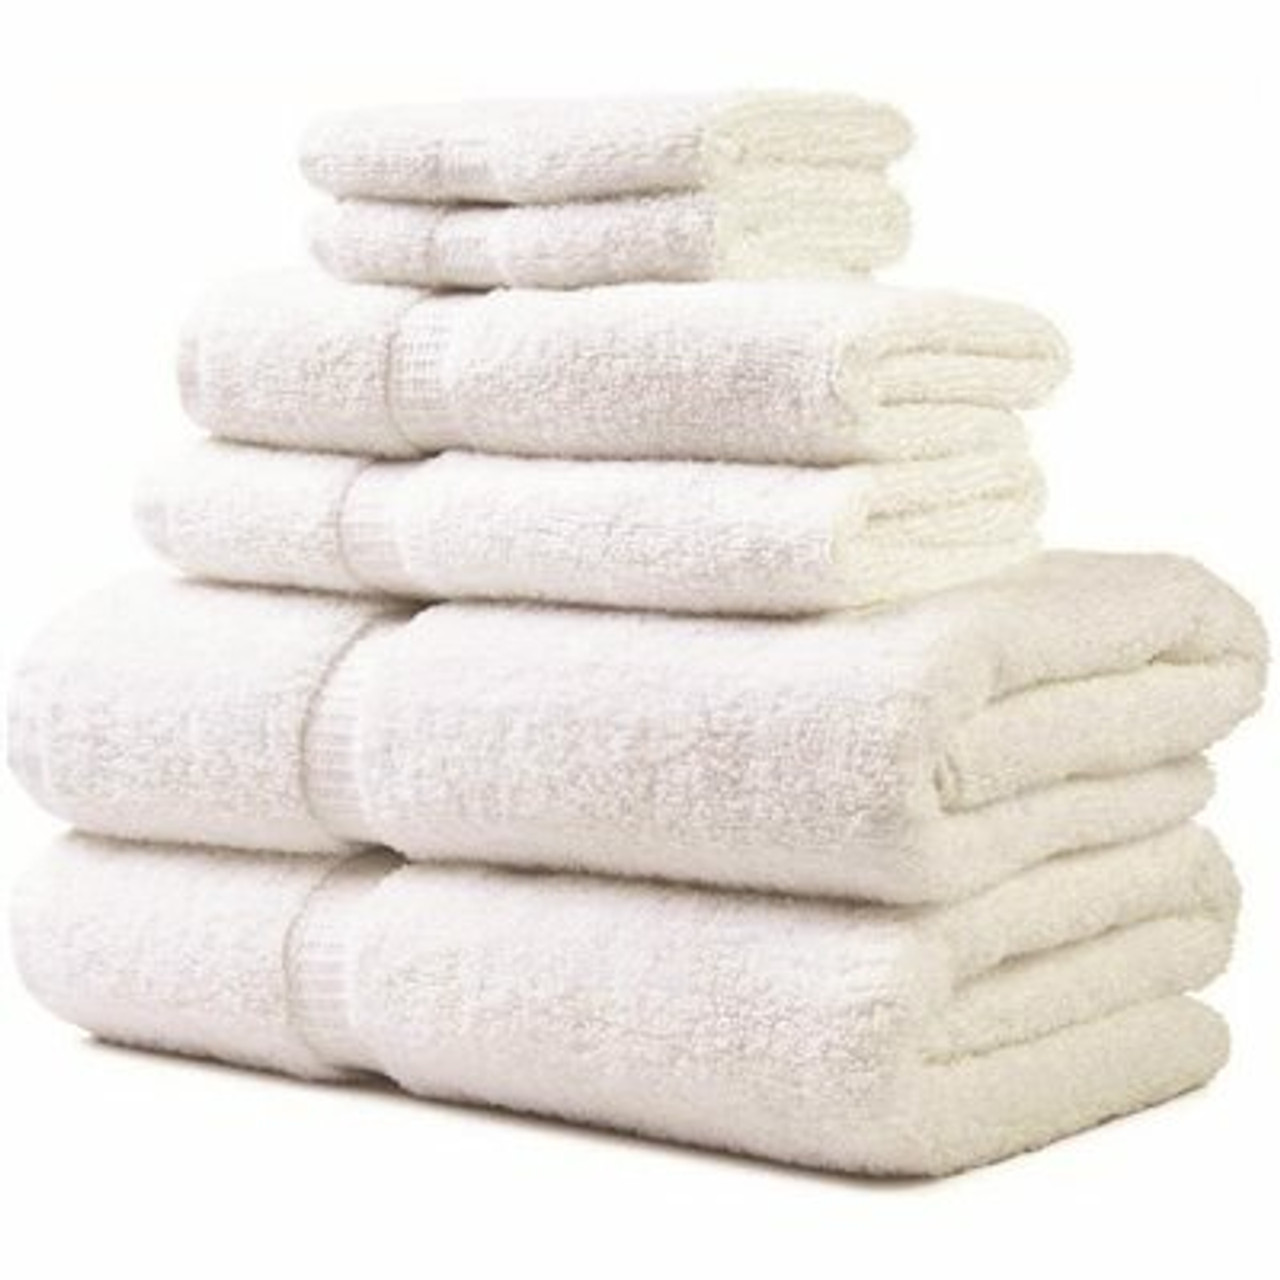 16 In. X 30 In. 4.5 Lb. Hand Towel With Dobby Border In White (Case Of 120)